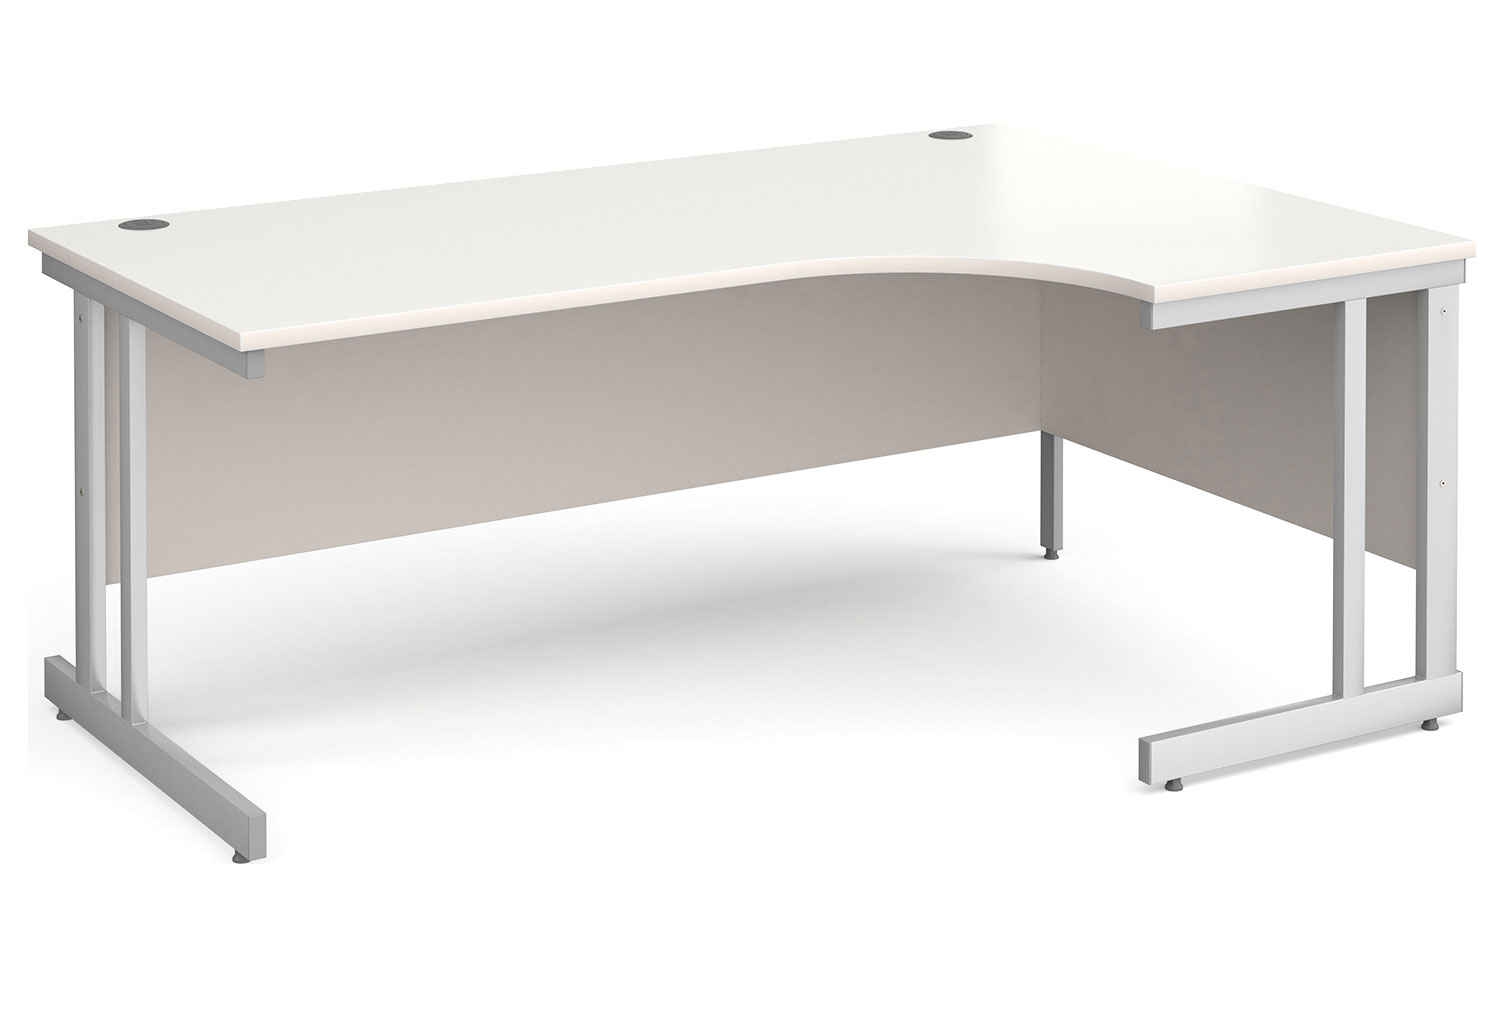 All White Double C-Leg Ergonomic Right Hand Office Desk, 180wx120/80dx73h (cm), Express Delivery